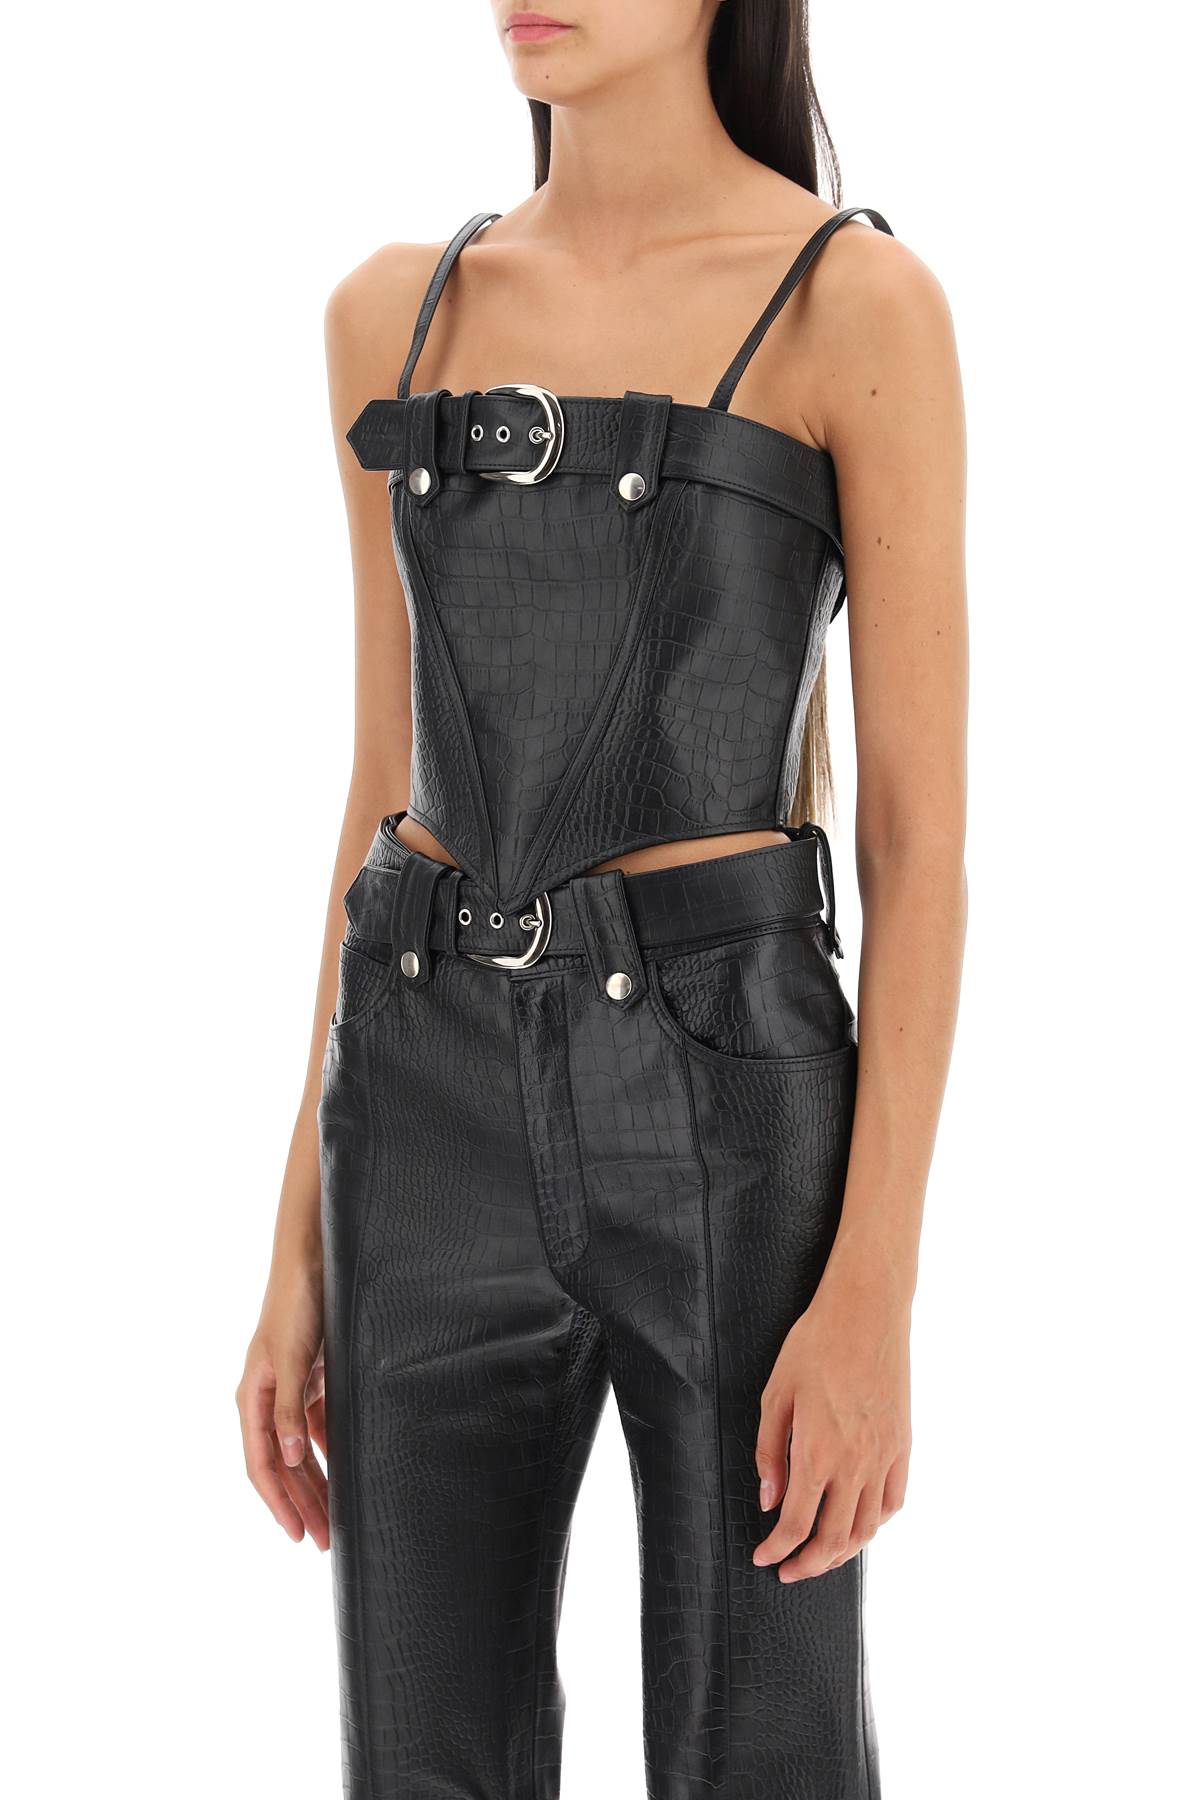 Alessandra rich croco-print leather bustier top-women > clothing > tops-Alessandra Rich-Urbanheer